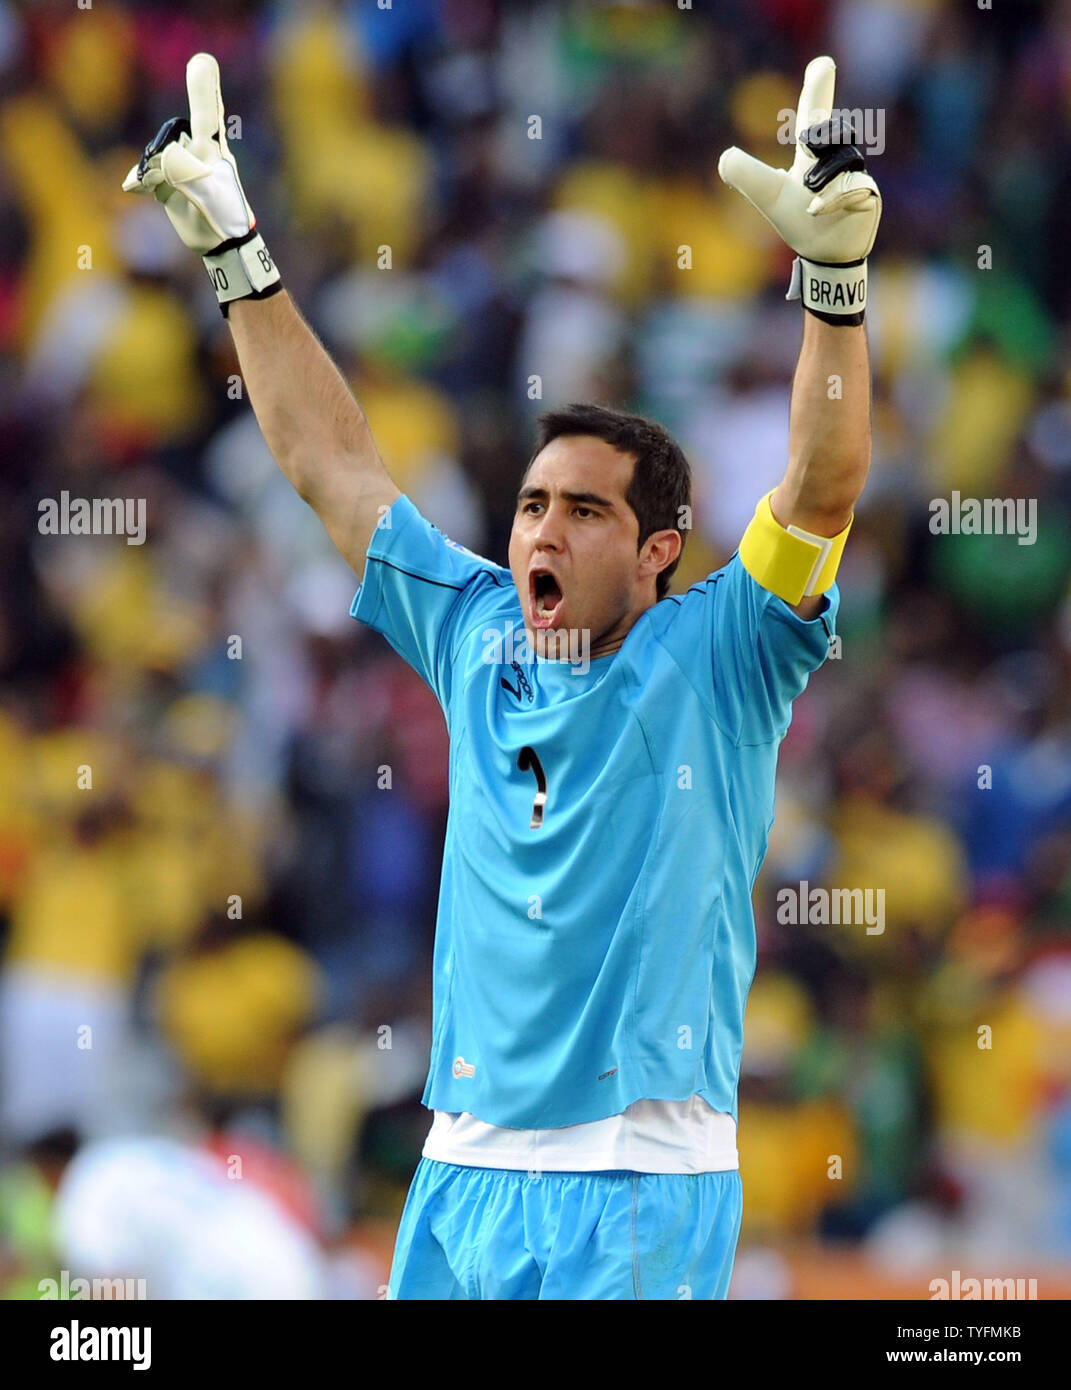 Claudio Bravo of Chile celebrates his side's opening goal during the Group H match at the Mbombela Stadium in Nelspruit, South Africa on June 16, 2010. UPI/Chris Brunskill Stock Photo